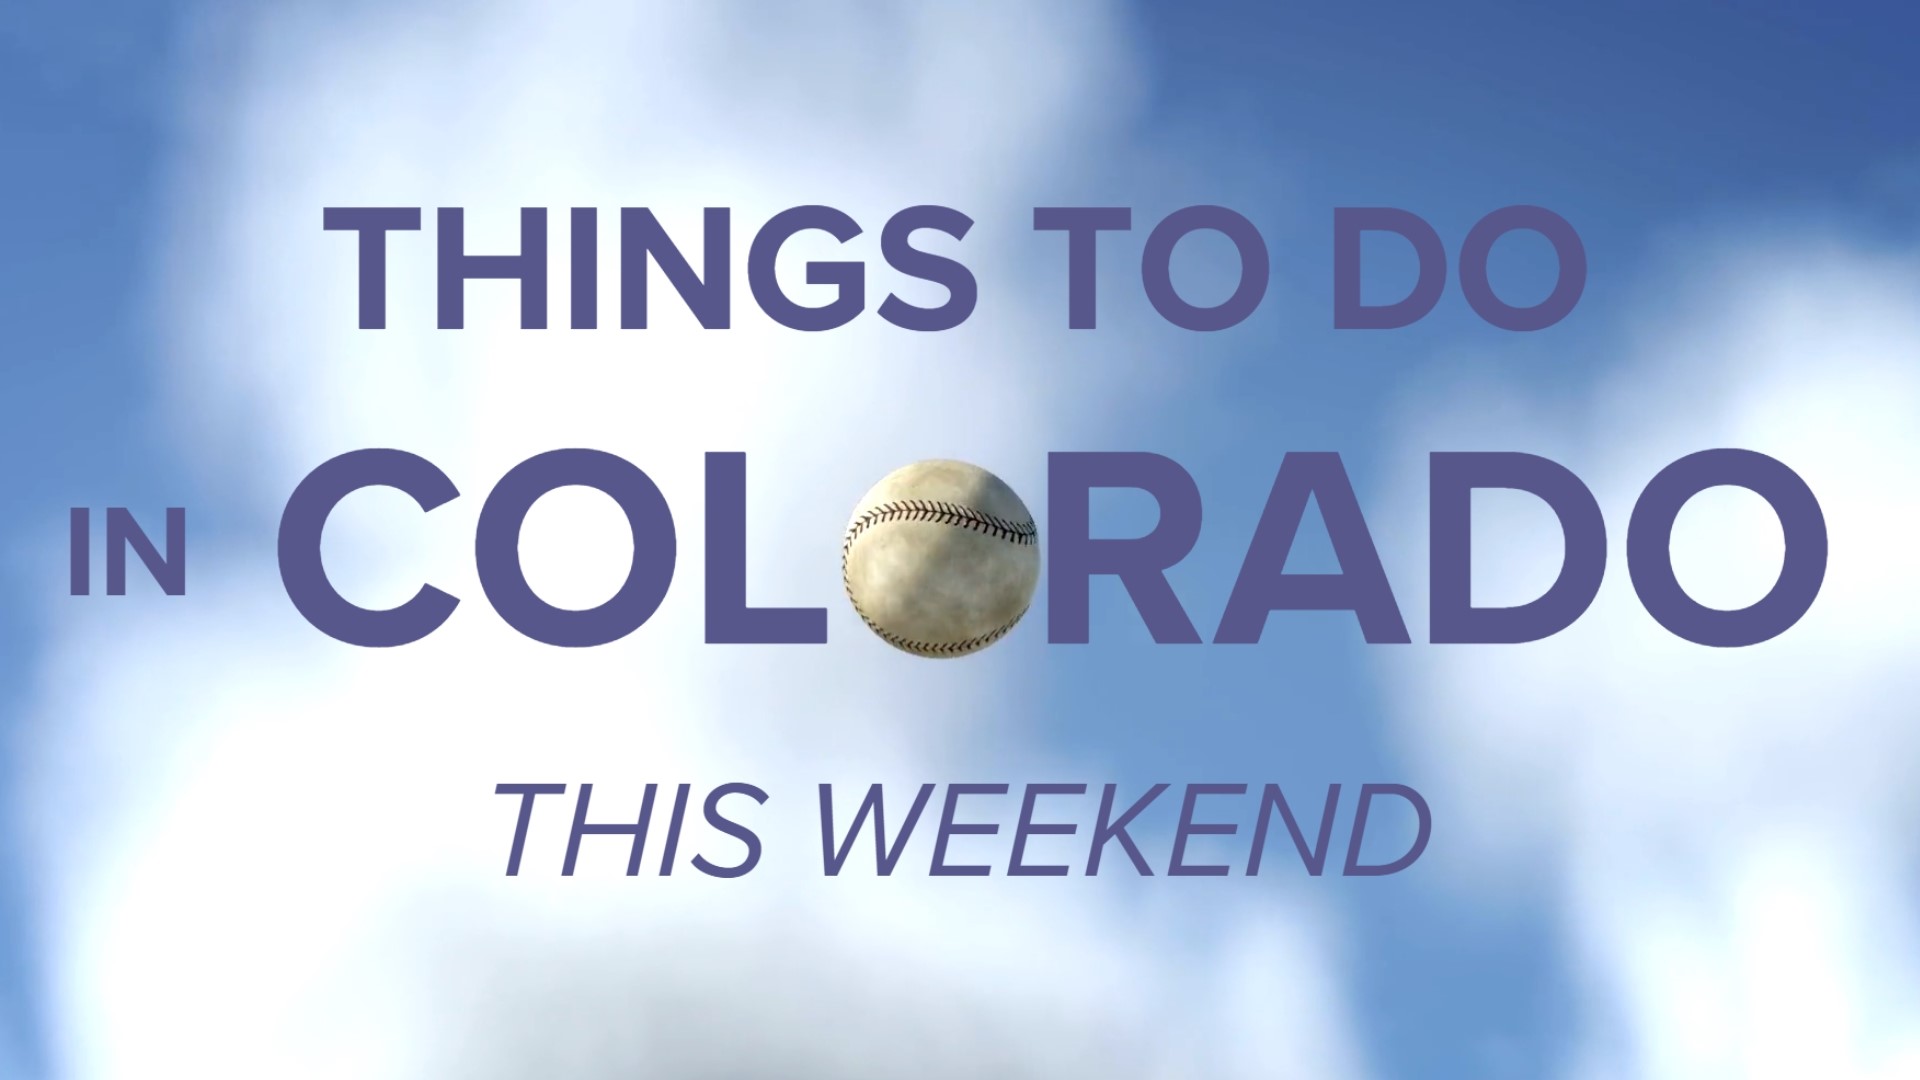 Rockies baseball is back in Colorado and farmers markets open for spring!